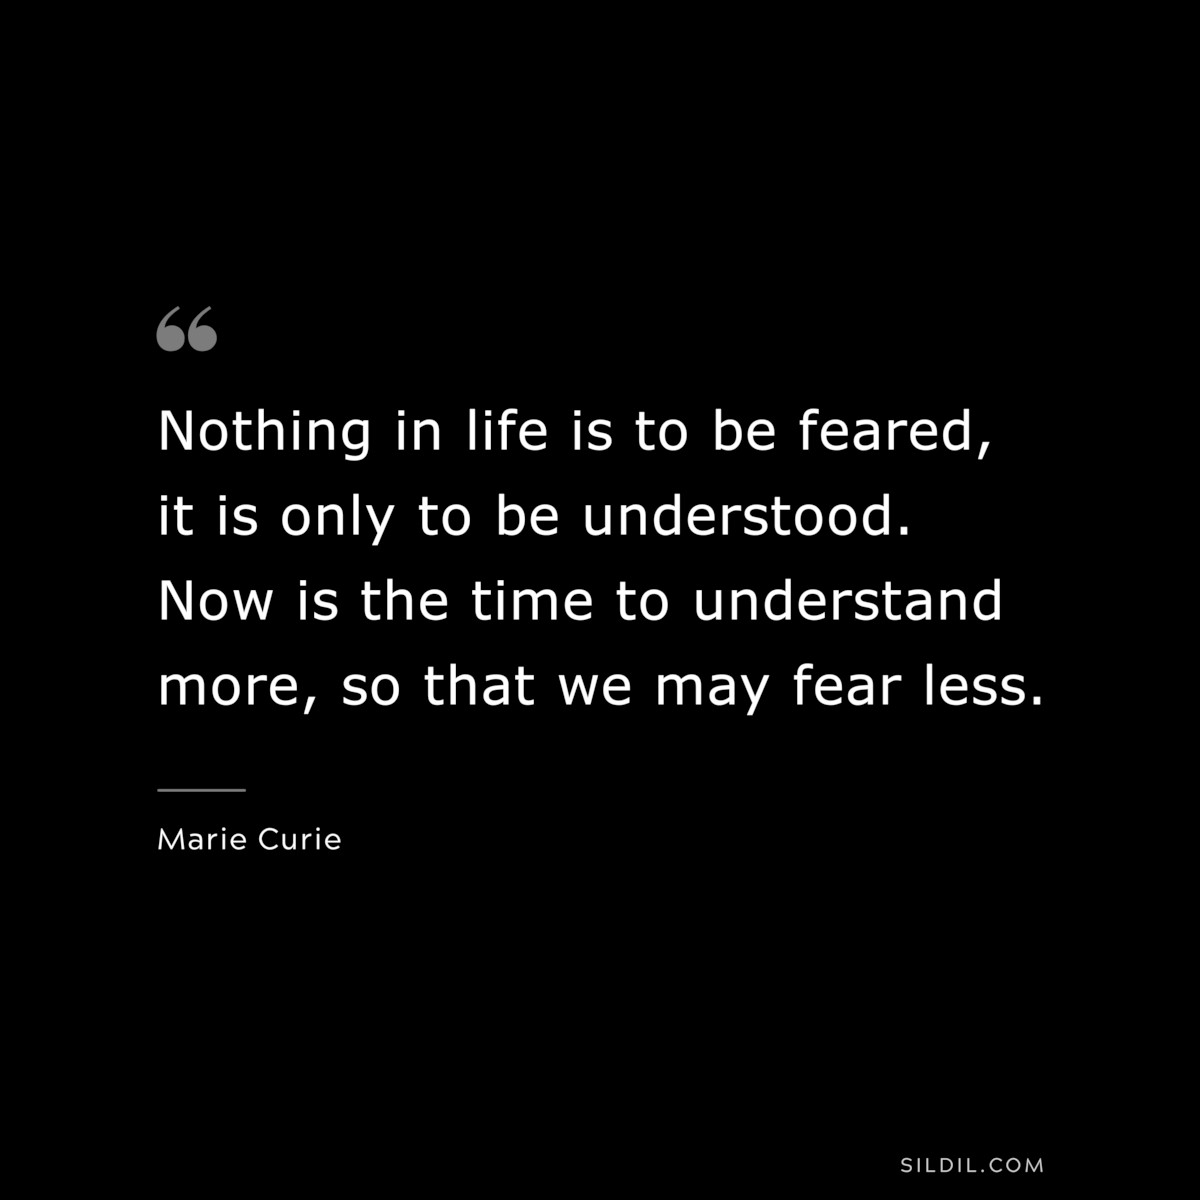 Nothing in life is to be feared, it is only to be understood. Now is the time to understand more, so that we may fear less. ― Marie Curie